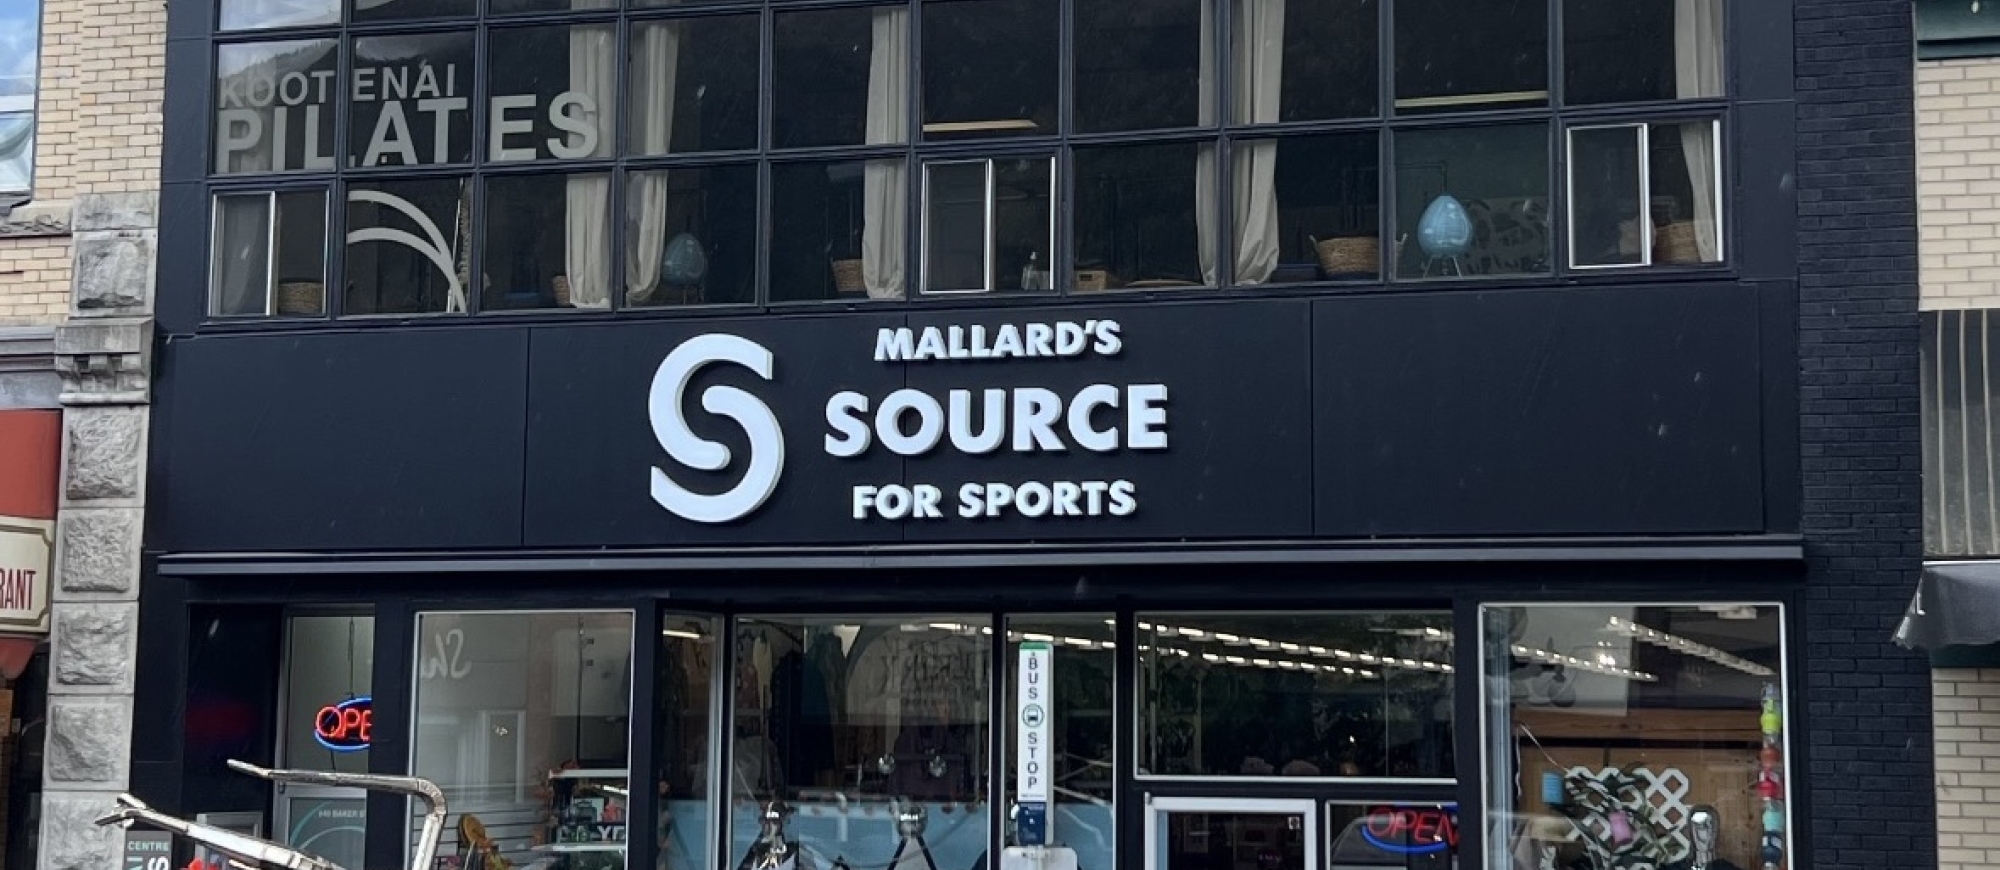 Mallard's Source for Sports building on Baker Street in Nelson, BC